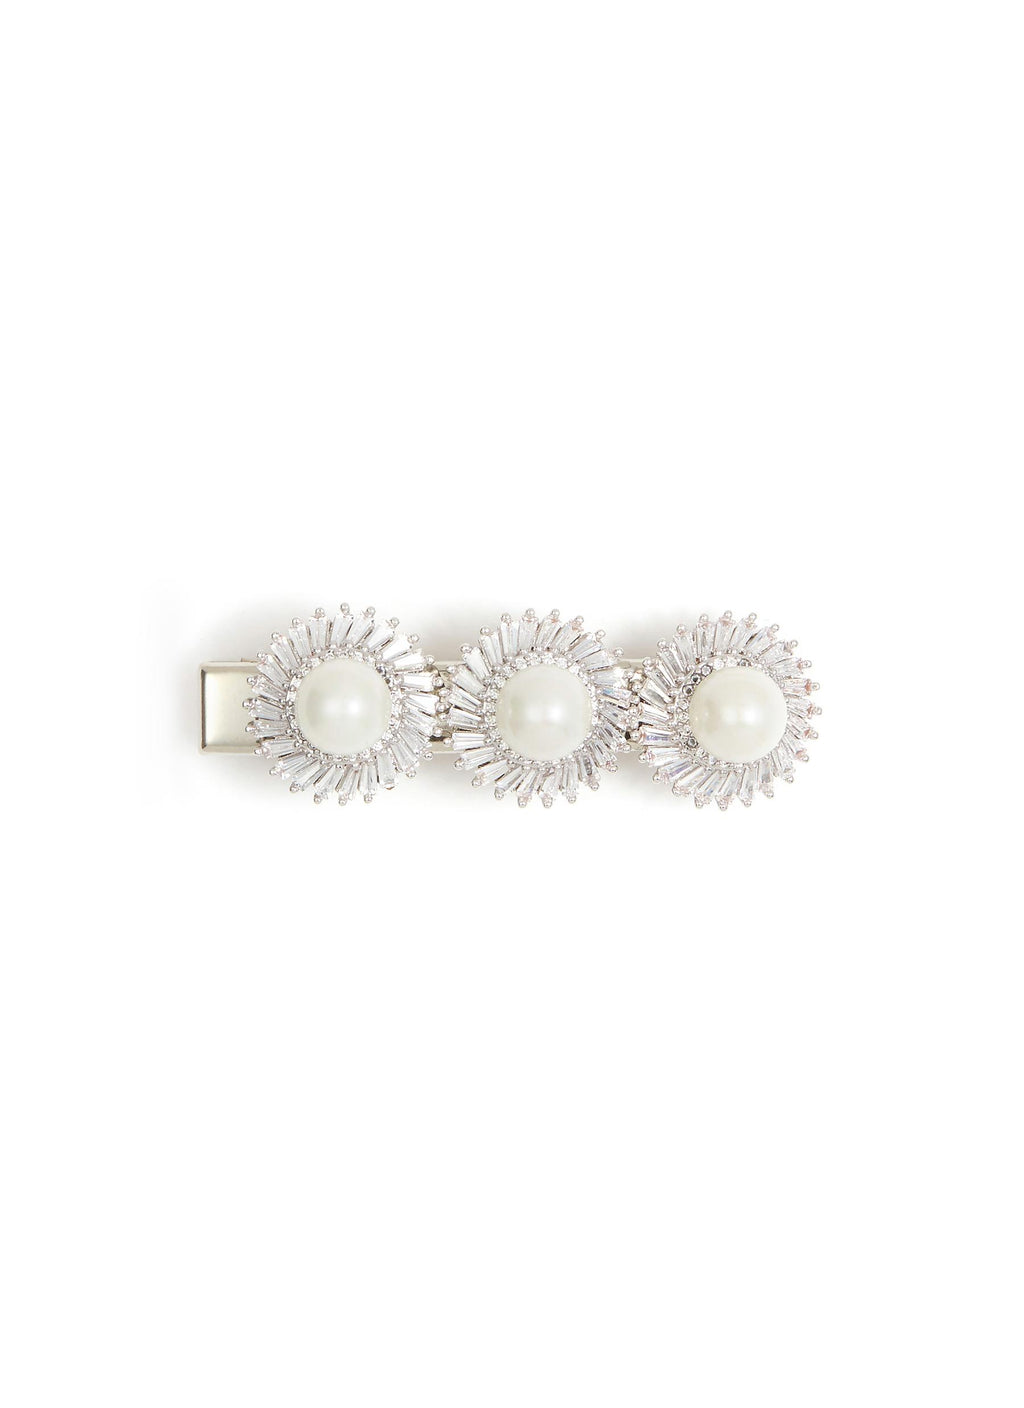 GLASS CRYSTAL FAUX PEARL FLORAL HAIR CLIP